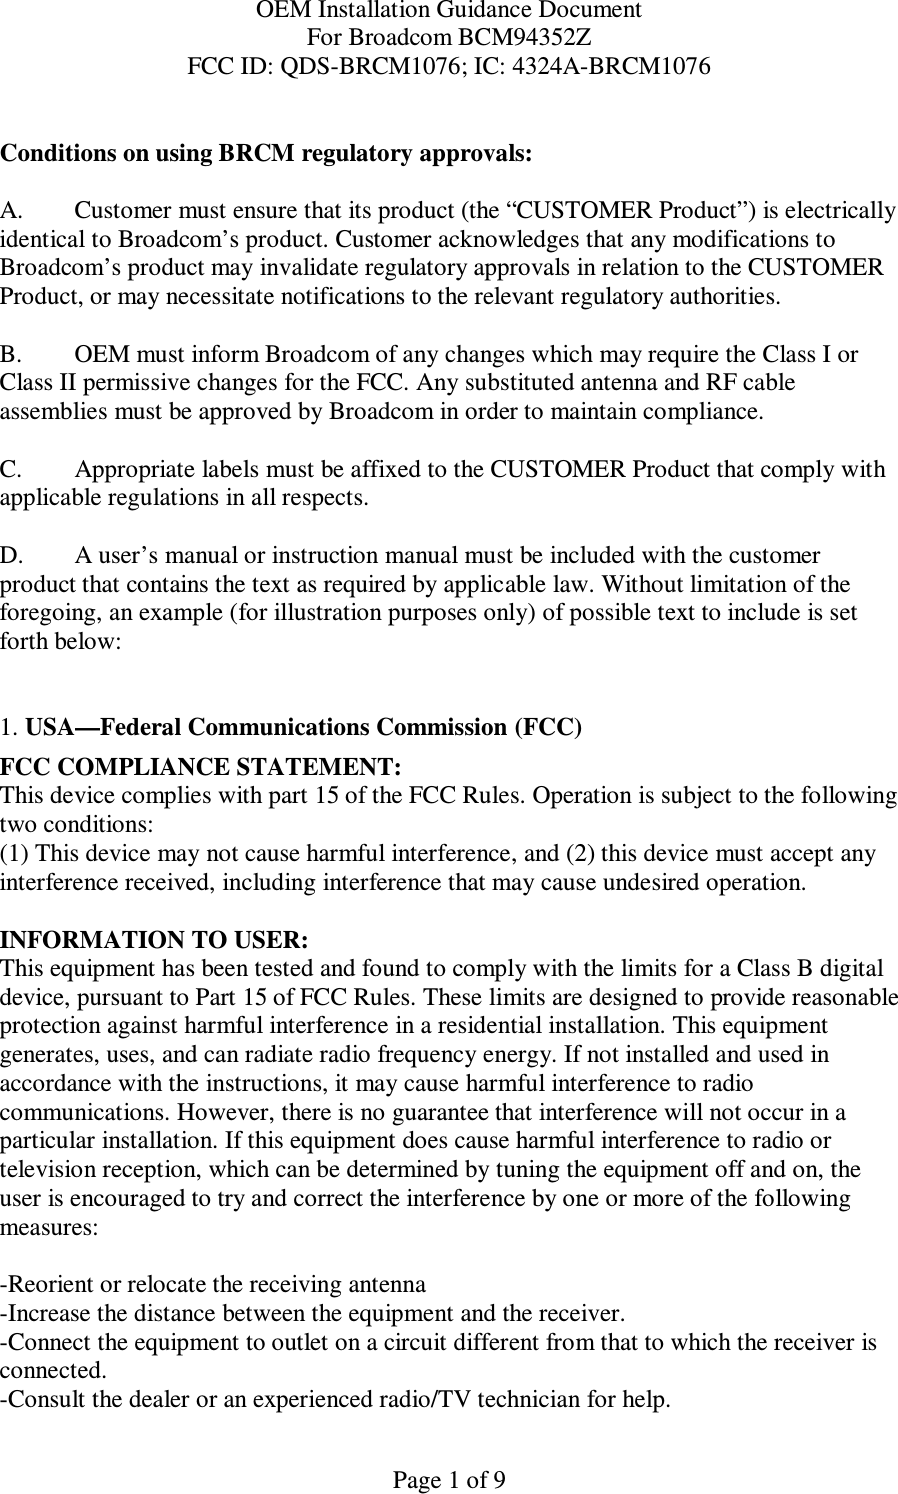 OEM Installation Guidance Document For Broadcom BCM94352Z FCC ID: QDS-BRCM1076; IC: 4324A-BRCM1076  Page 1 of 9  Conditions on using BRCM regulatory approvals:   A.  Customer must ensure that its product (the “CUSTOMER Product”) is electrically identical to Broadcom’s product. Customer acknowledges that any modifications to Broadcom’s product may invalidate regulatory approvals in relation to the CUSTOMER Product, or may necessitate notifications to the relevant regulatory authorities.   B.   OEM must inform Broadcom of any changes which may require the Class I or Class II permissive changes for the FCC. Any substituted antenna and RF cable assemblies must be approved by Broadcom in order to maintain compliance.  C.  Appropriate labels must be affixed to the CUSTOMER Product that comply with  applicable regulations in all respects.    D.   A user’s manual or instruction manual must be included with the customer product that contains the text as required by applicable law. Without limitation of the foregoing, an example (for illustration purposes only) of possible text to include is set forth below:    1. USA—Federal Communications Commission (FCC) FCC COMPLIANCE STATEMENT: This device complies with part 15 of the FCC Rules. Operation is subject to the following two conditions: (1) This device may not cause harmful interference, and (2) this device must accept any interference received, including interference that may cause undesired operation.  INFORMATION TO USER: This equipment has been tested and found to comply with the limits for a Class B digital device, pursuant to Part 15 of FCC Rules. These limits are designed to provide reasonable protection against harmful interference in a residential installation. This equipment generates, uses, and can radiate radio frequency energy. If not installed and used in accordance with the instructions, it may cause harmful interference to radio communications. However, there is no guarantee that interference will not occur in a particular installation. If this equipment does cause harmful interference to radio or television reception, which can be determined by tuning the equipment off and on, the user is encouraged to try and correct the interference by one or more of the following measures:    -Reorient or relocate the receiving antenna -Increase the distance between the equipment and the receiver. -Connect the equipment to outlet on a circuit different from that to which the receiver is connected. -Consult the dealer or an experienced radio/TV technician for help. 